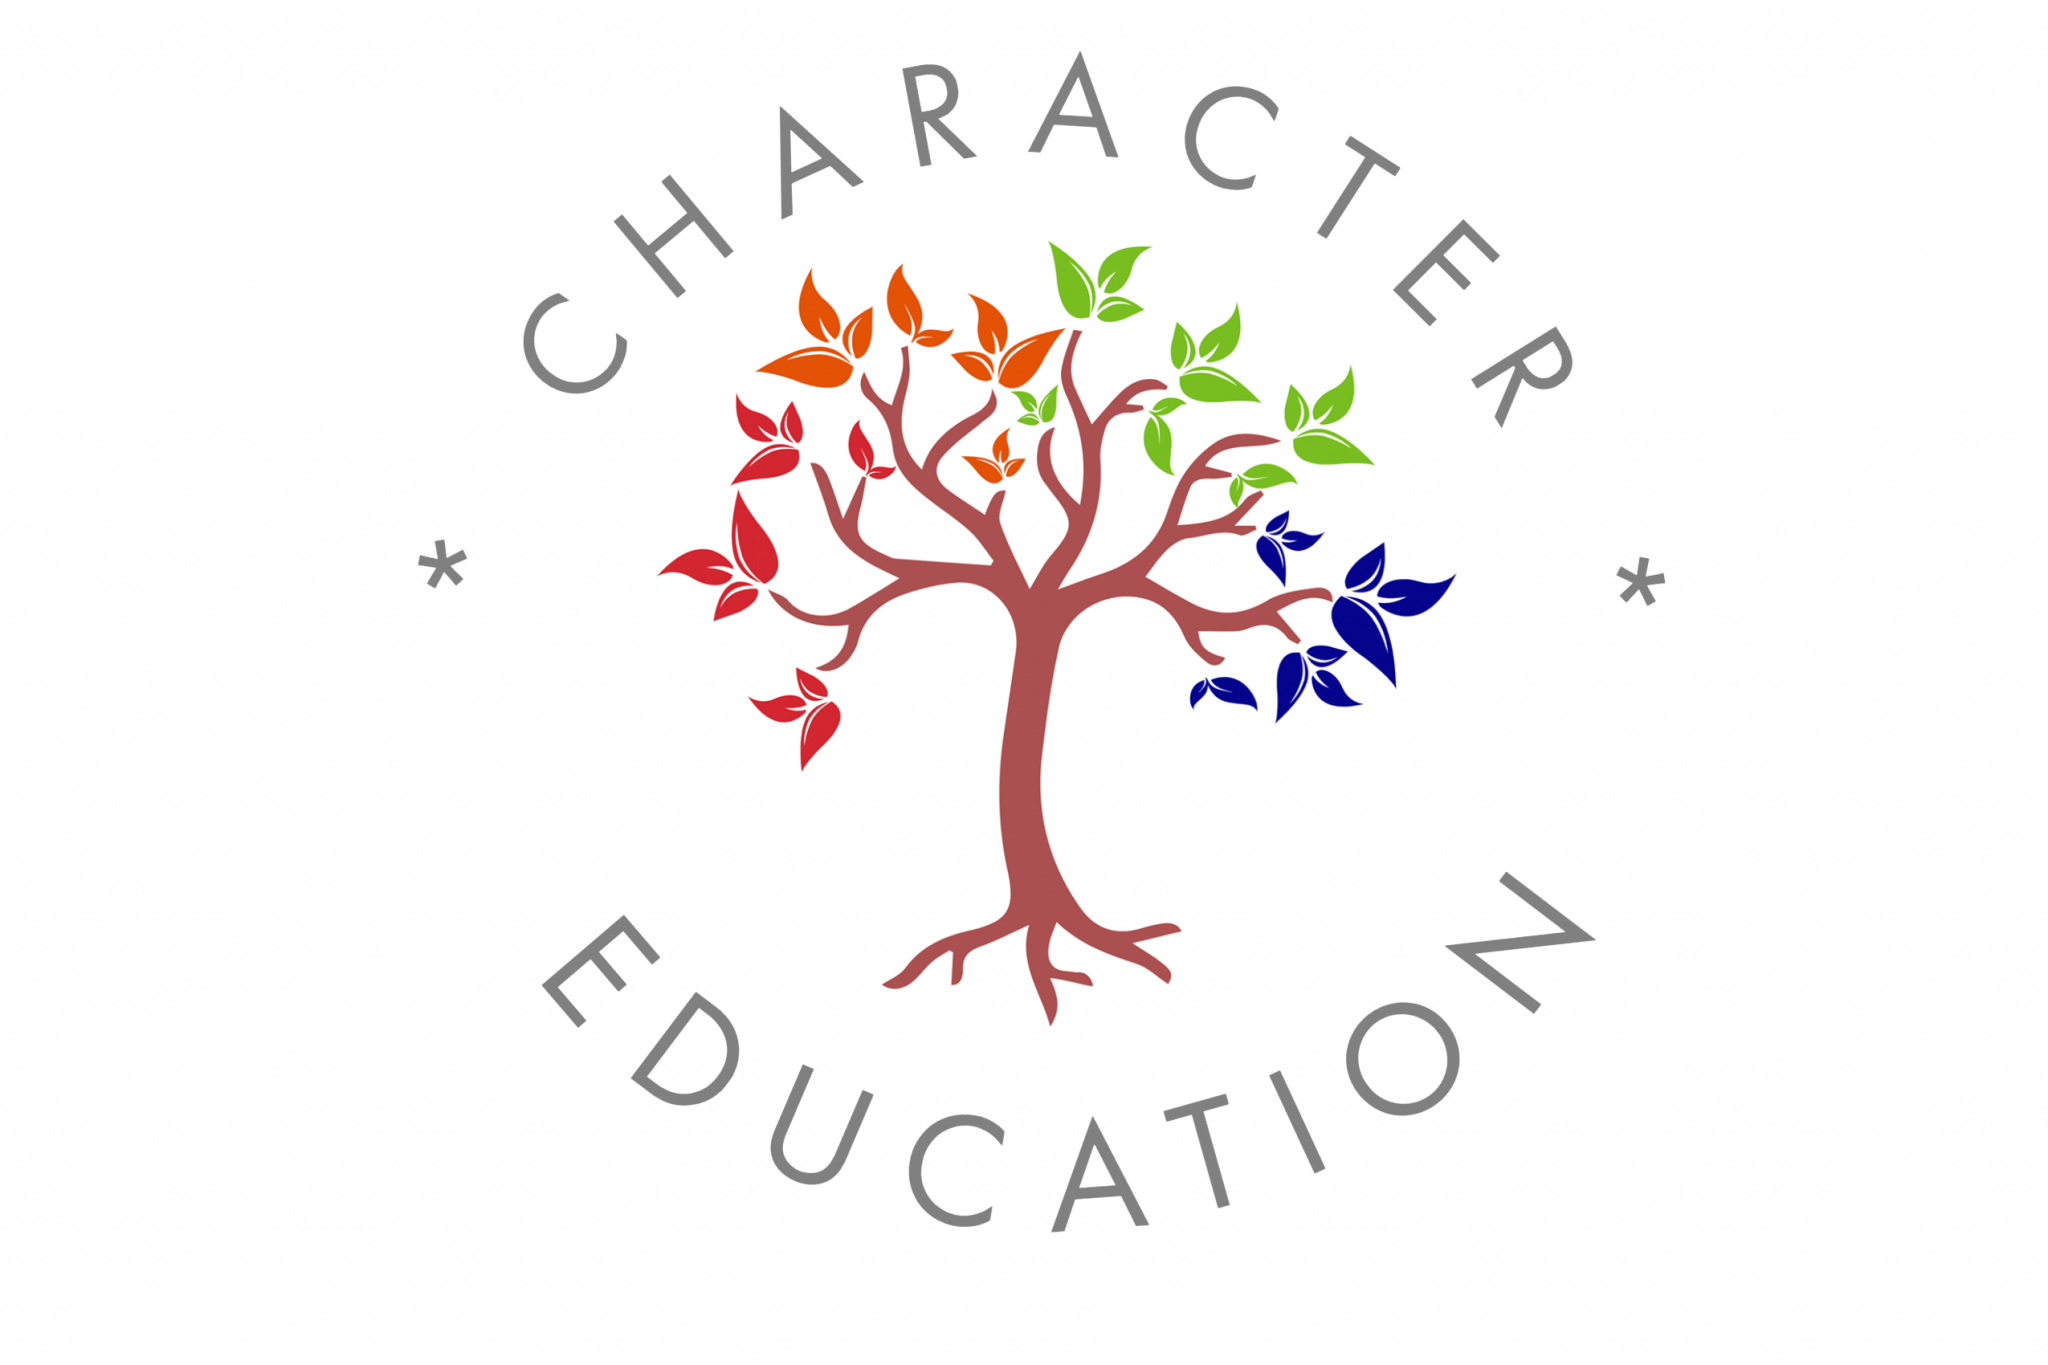 what is importance of character education